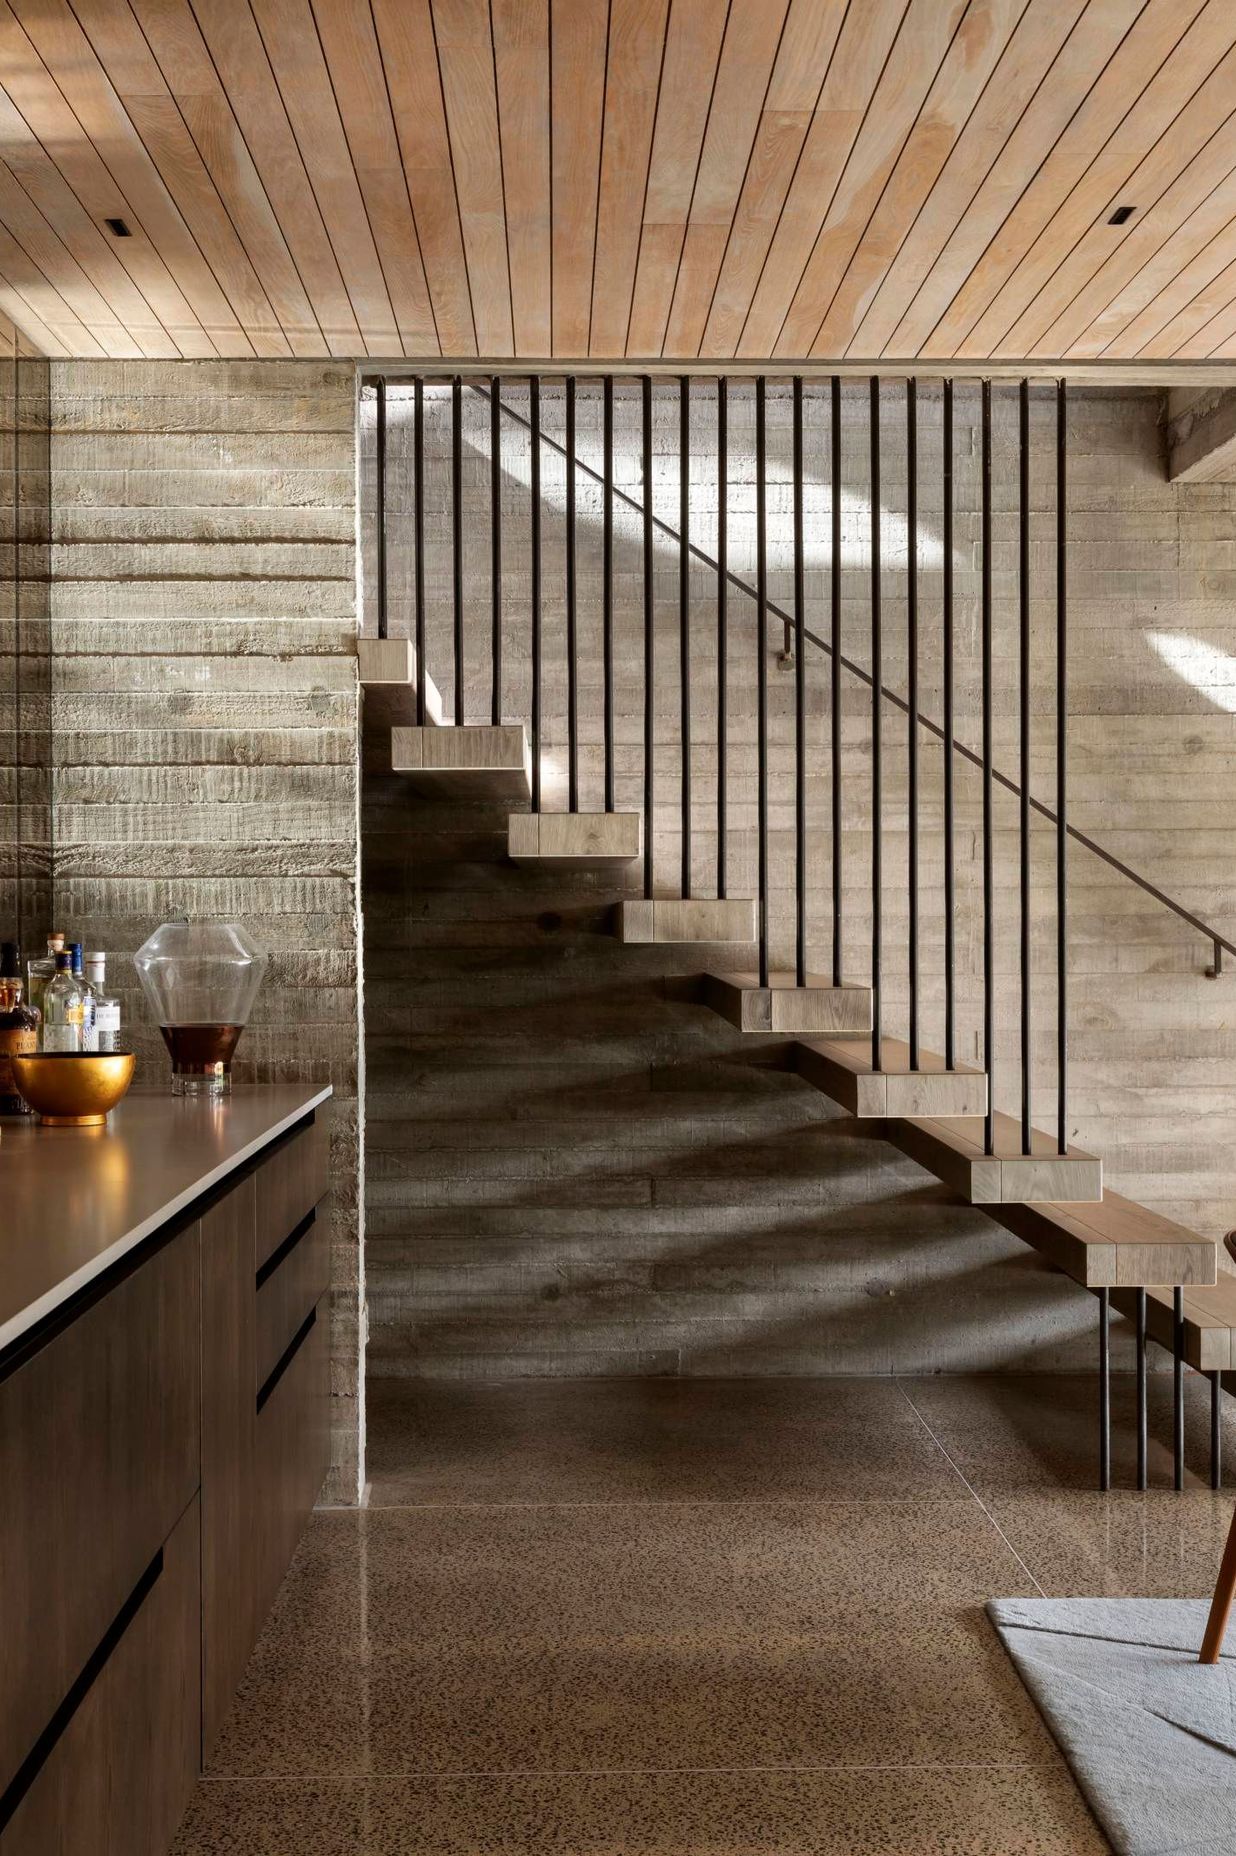 The architect's vision was to provide opportunities for natural light to be brought into the built environment. Open risers on the stairs permit light and create shifting shadows throughout the day.